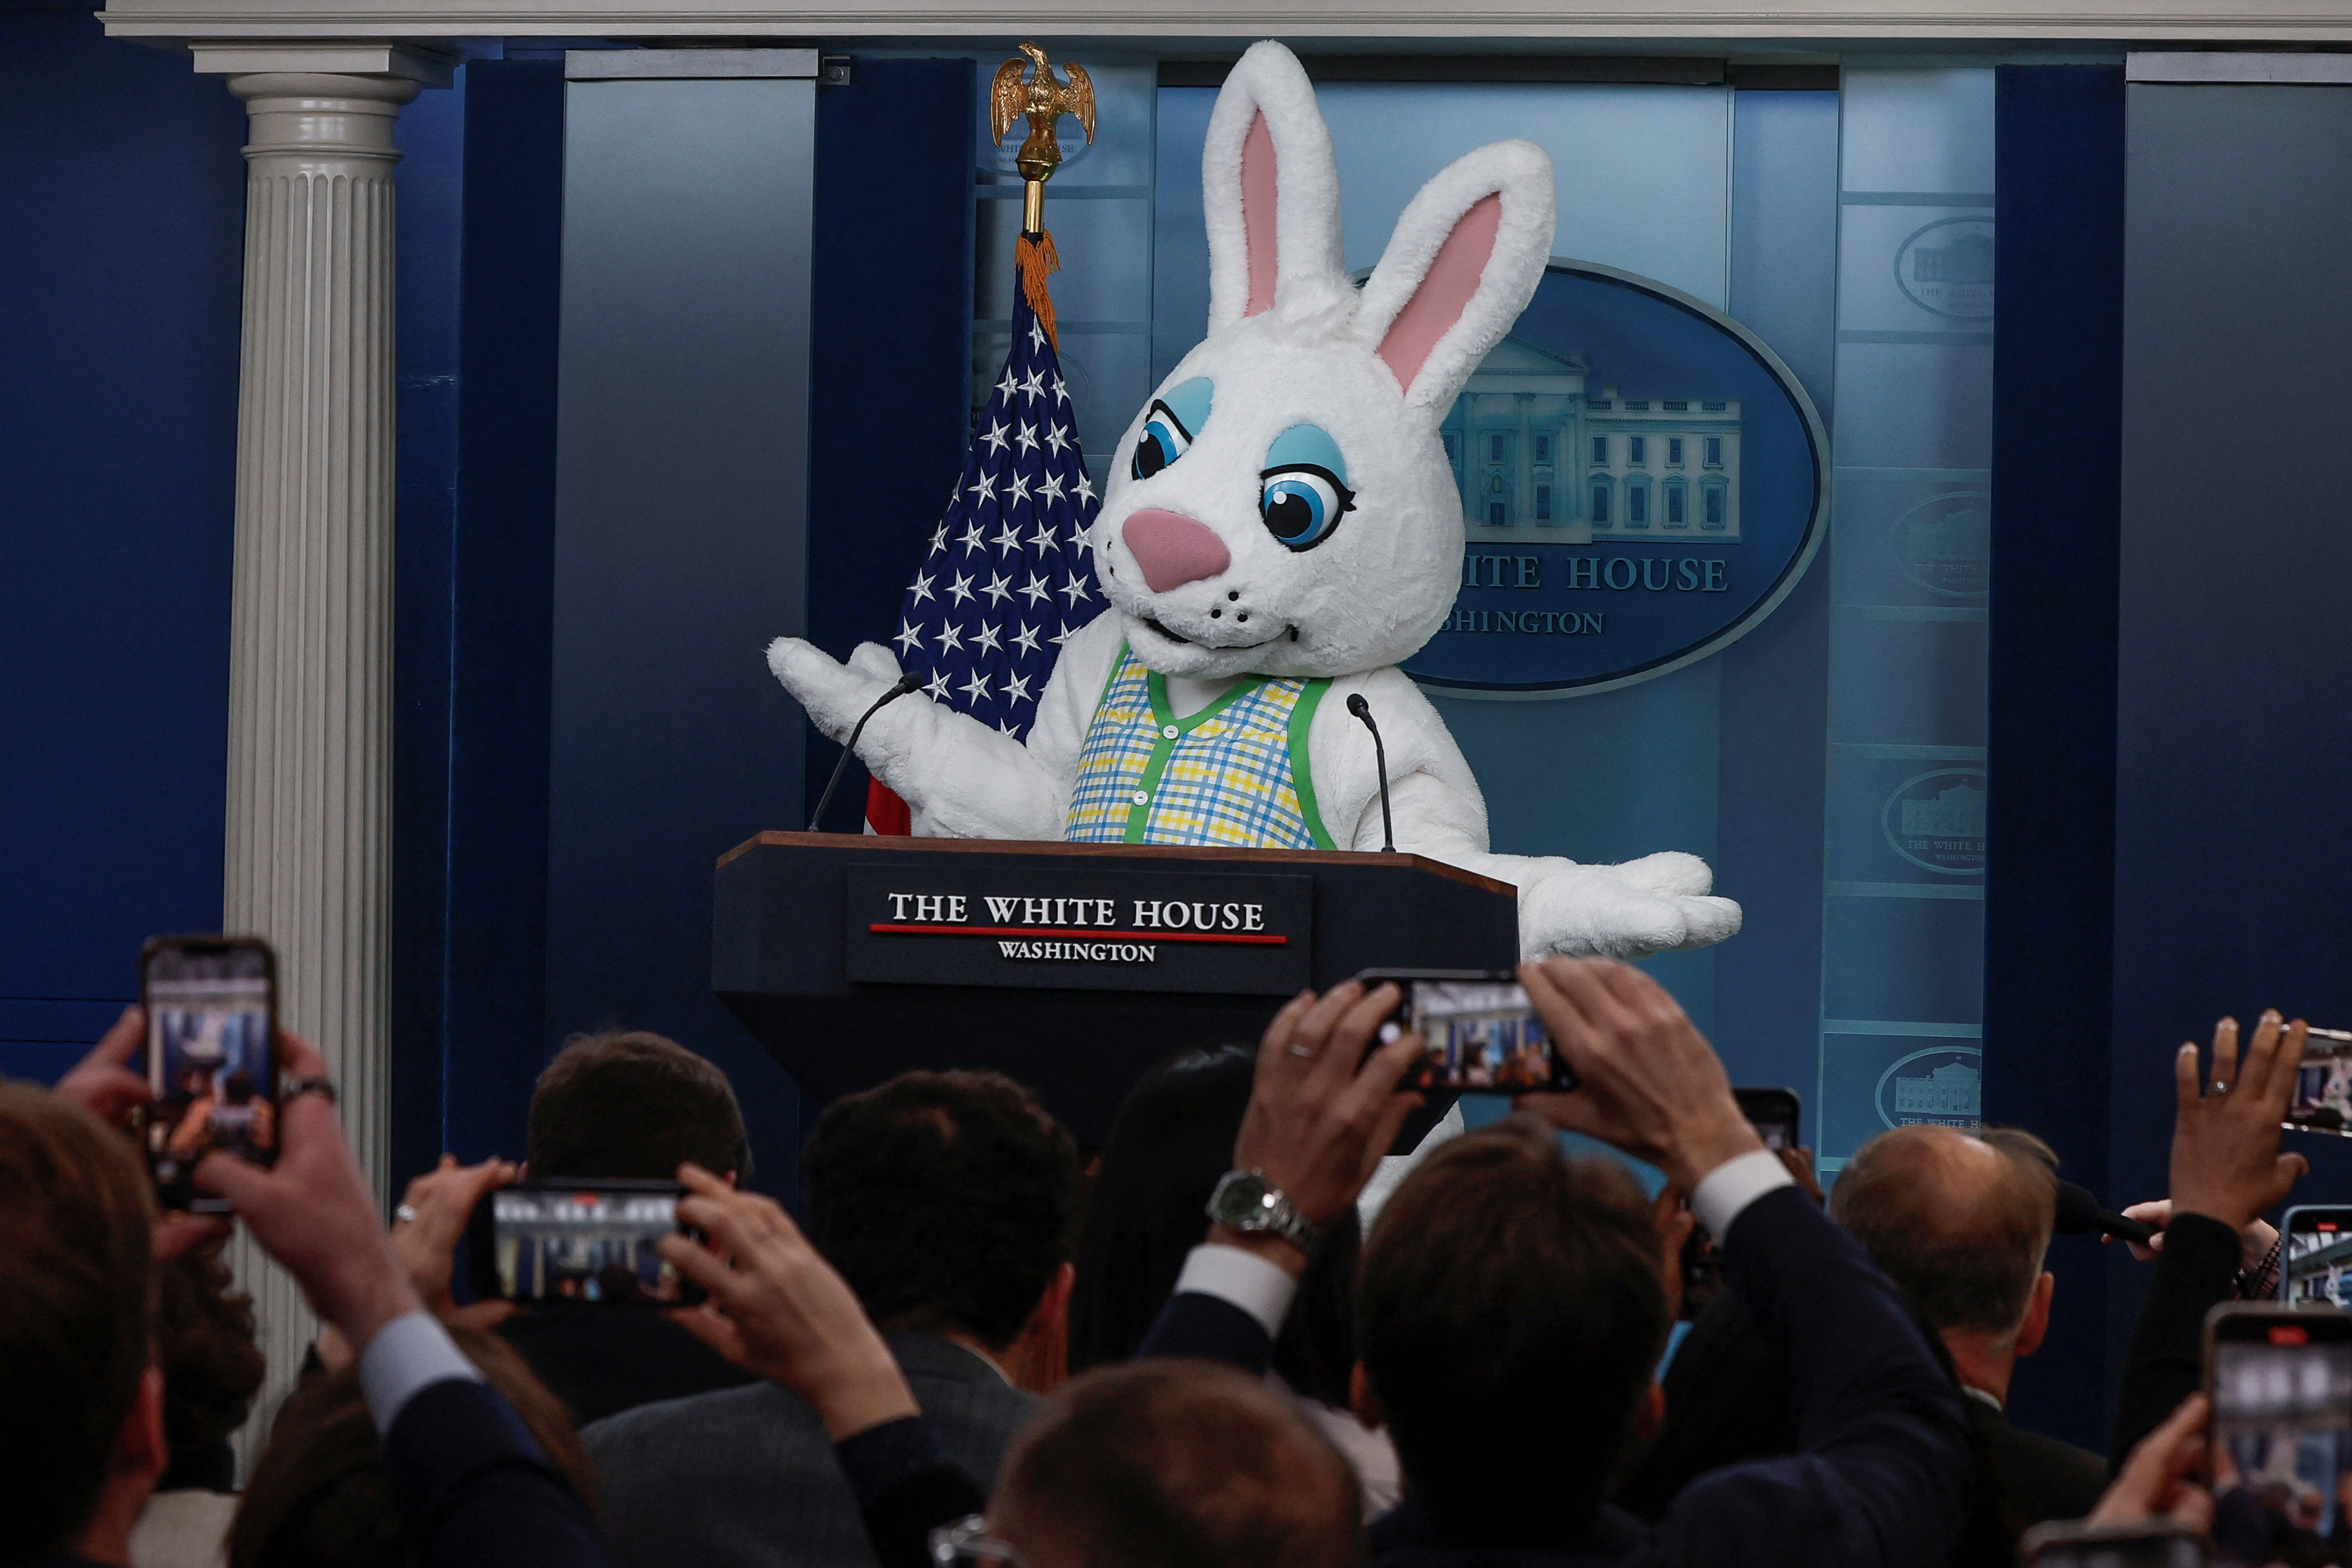 The Easter bunny makes a guest appearance at the press briefing at the White House in Washington